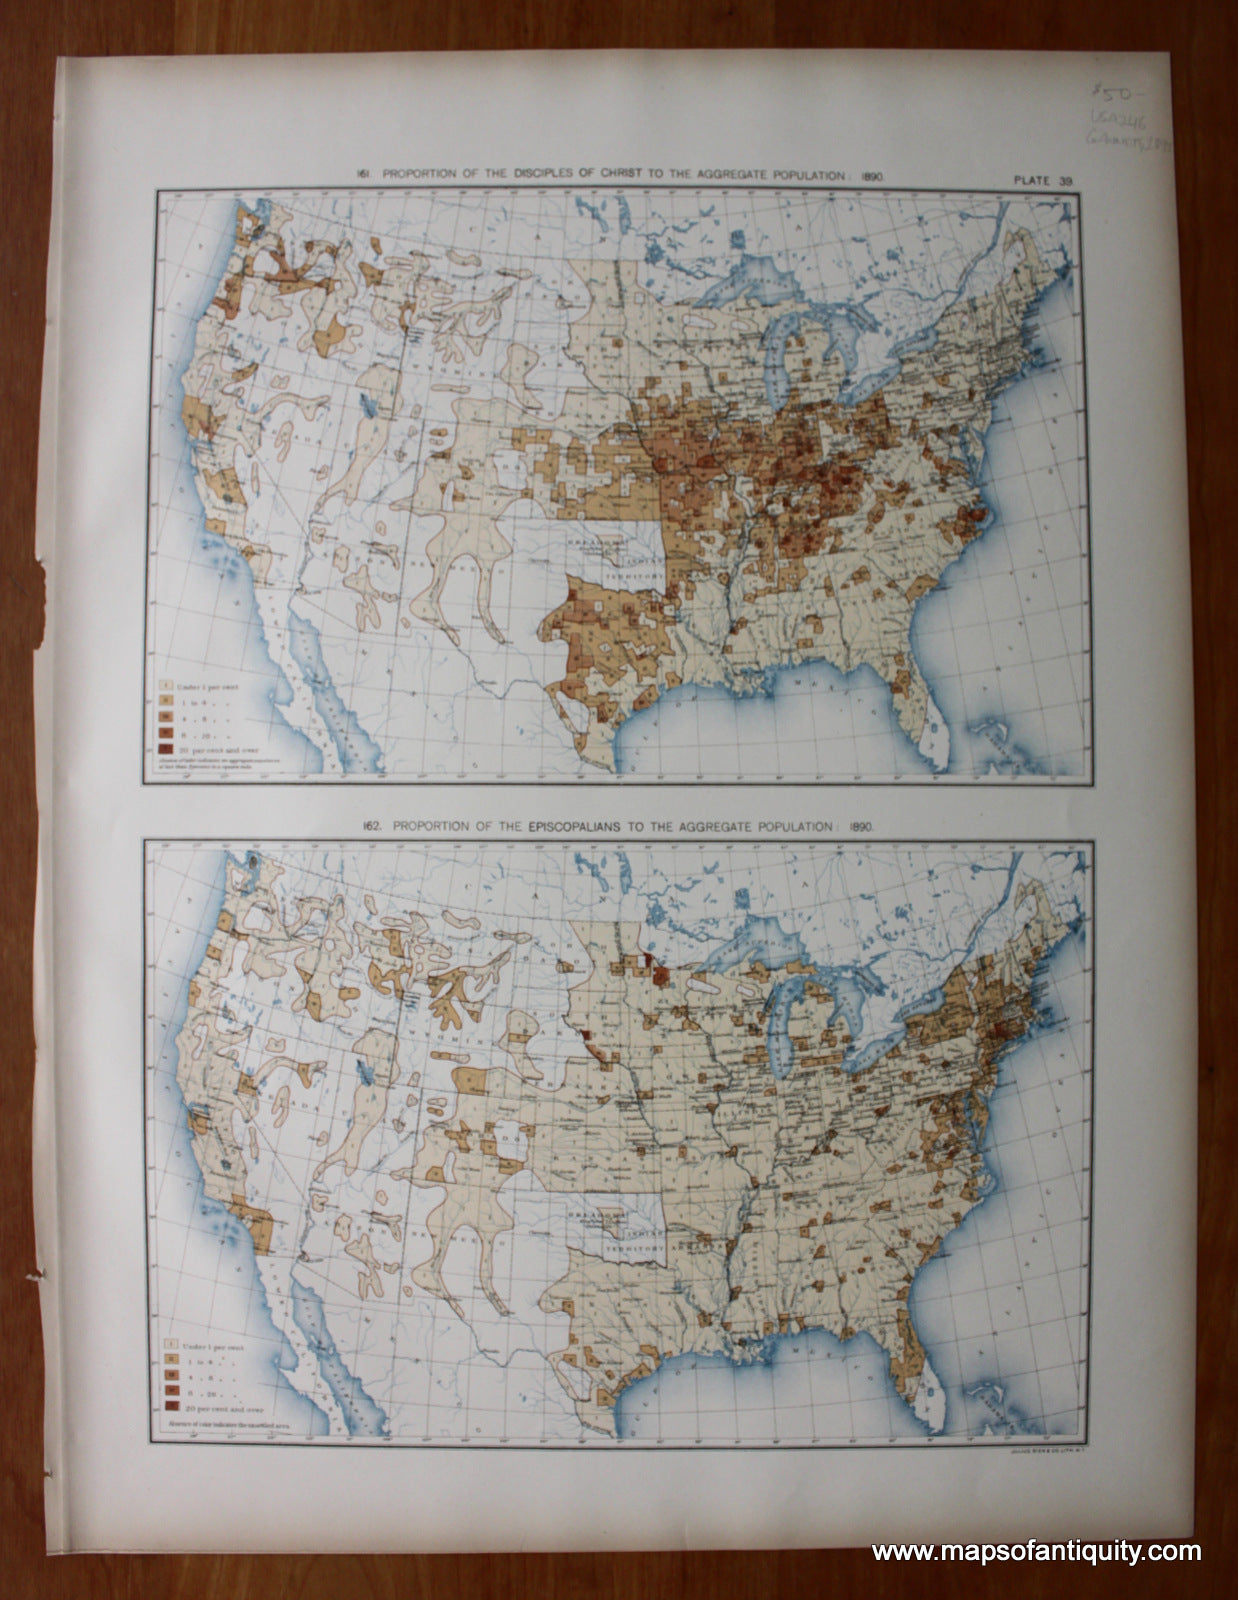 Antique-Printed-Color-Map-Proportion-of-the-Disciples-of-Christ-to-the-Aggregate-Population:-1890/-Proportion-of-the-Episcopalians-to-the-Aggregate-Population:-1890-United-States-United-States-General-1898-Gannett-Maps-Of-Antiquity